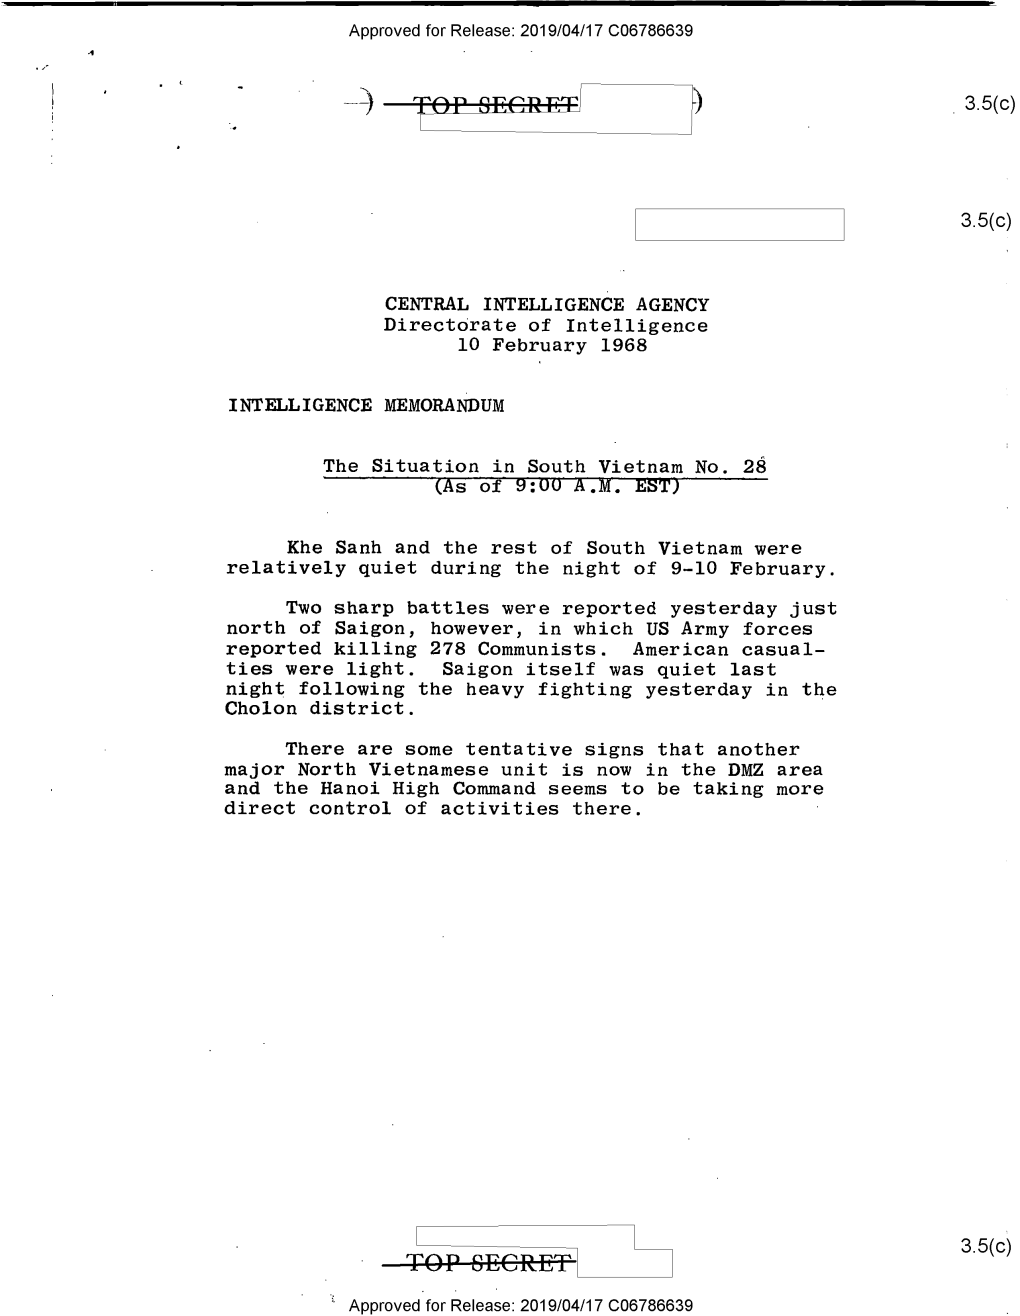 Report on the Situation in Vietnam, 10 February 1968